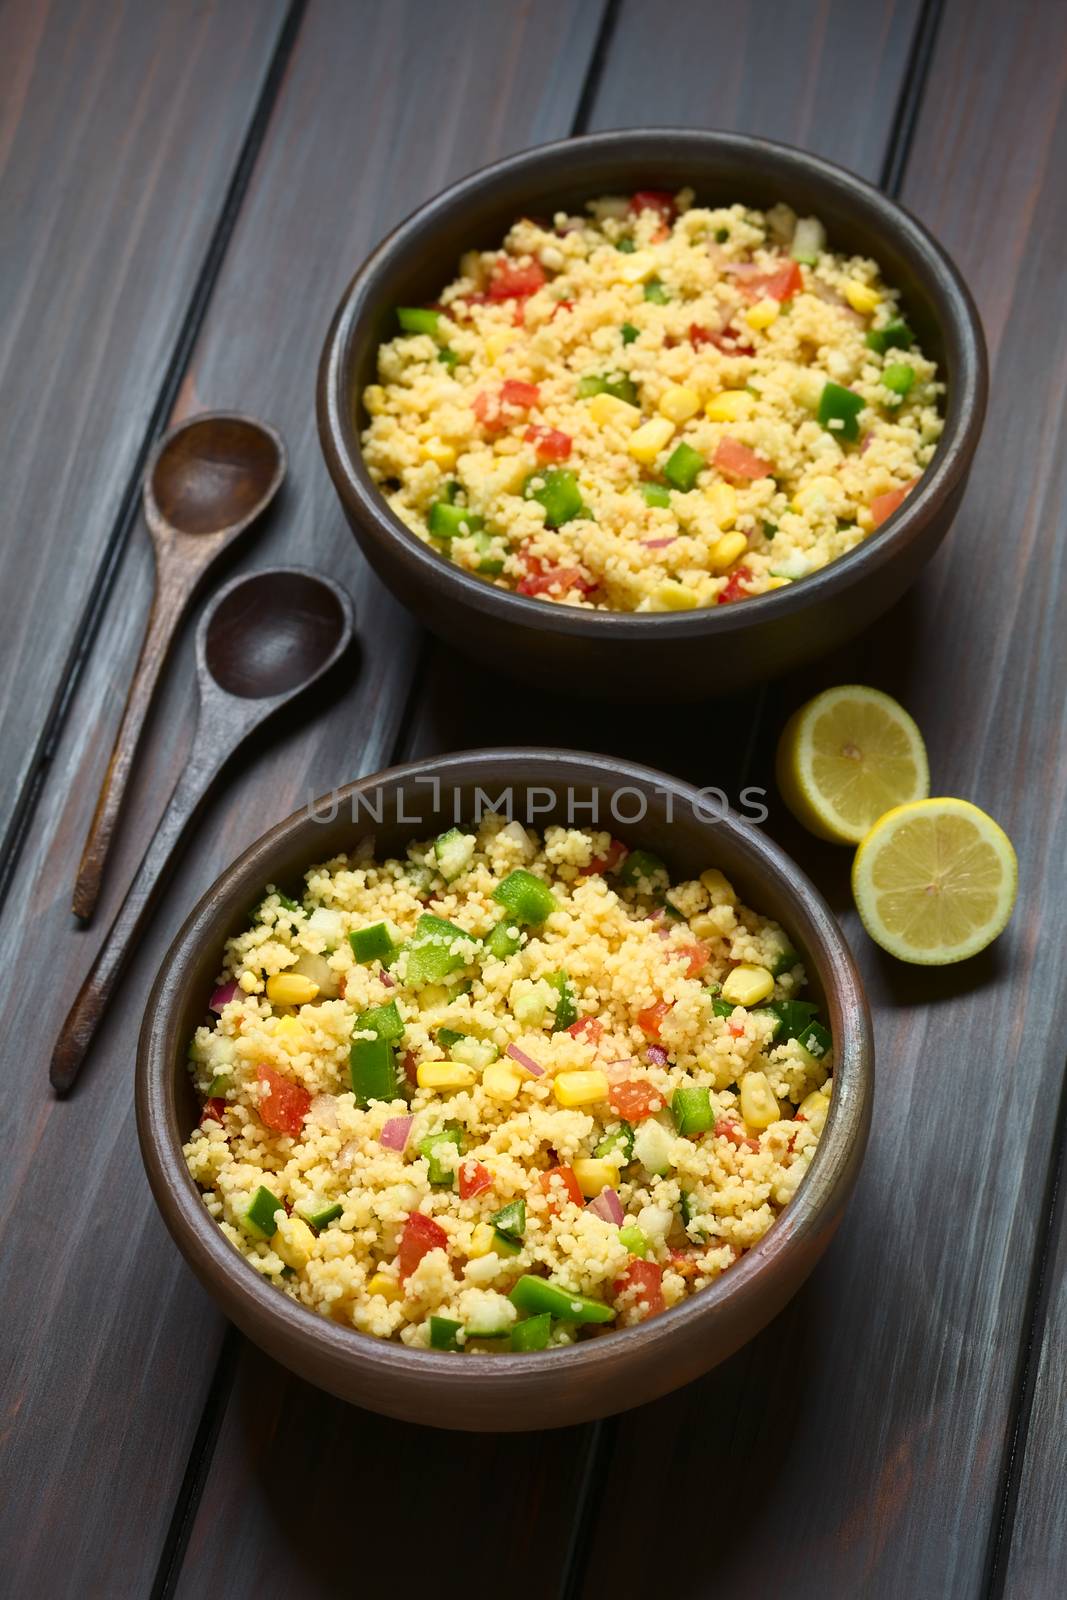 Vegetable and Couscous Salad by ildi